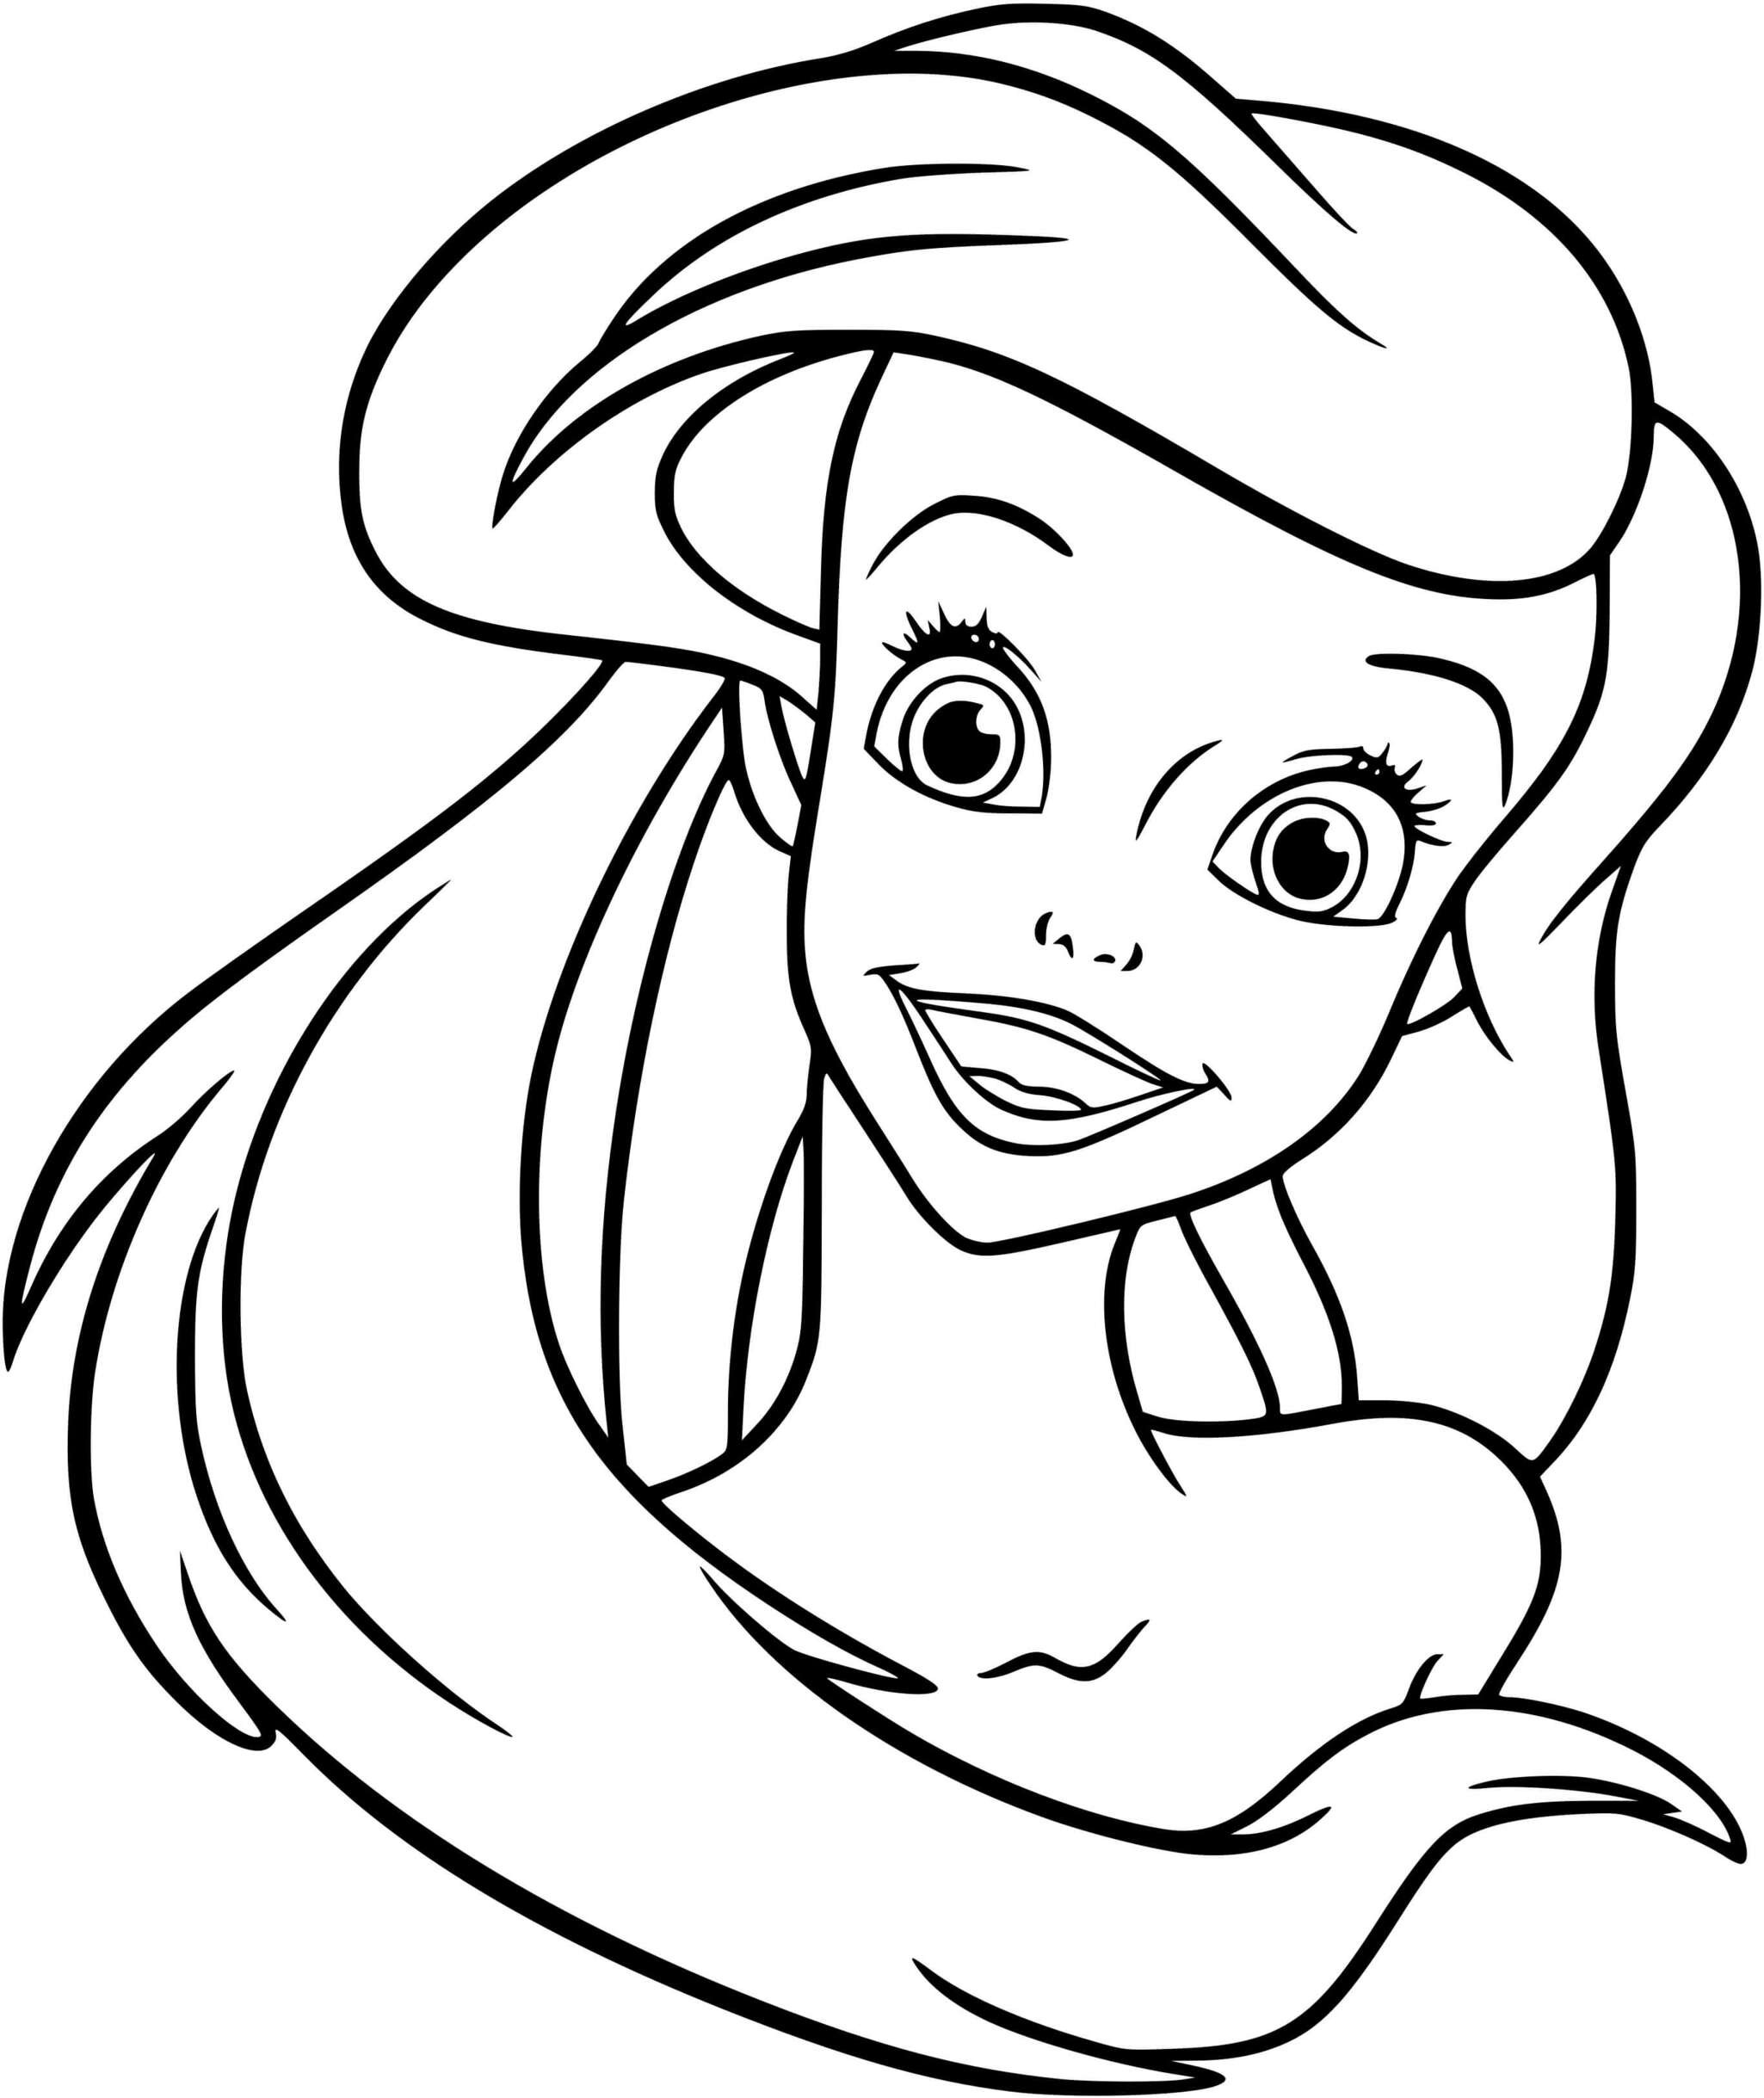 Princess Ariel The Little Mermaid Coloring Page